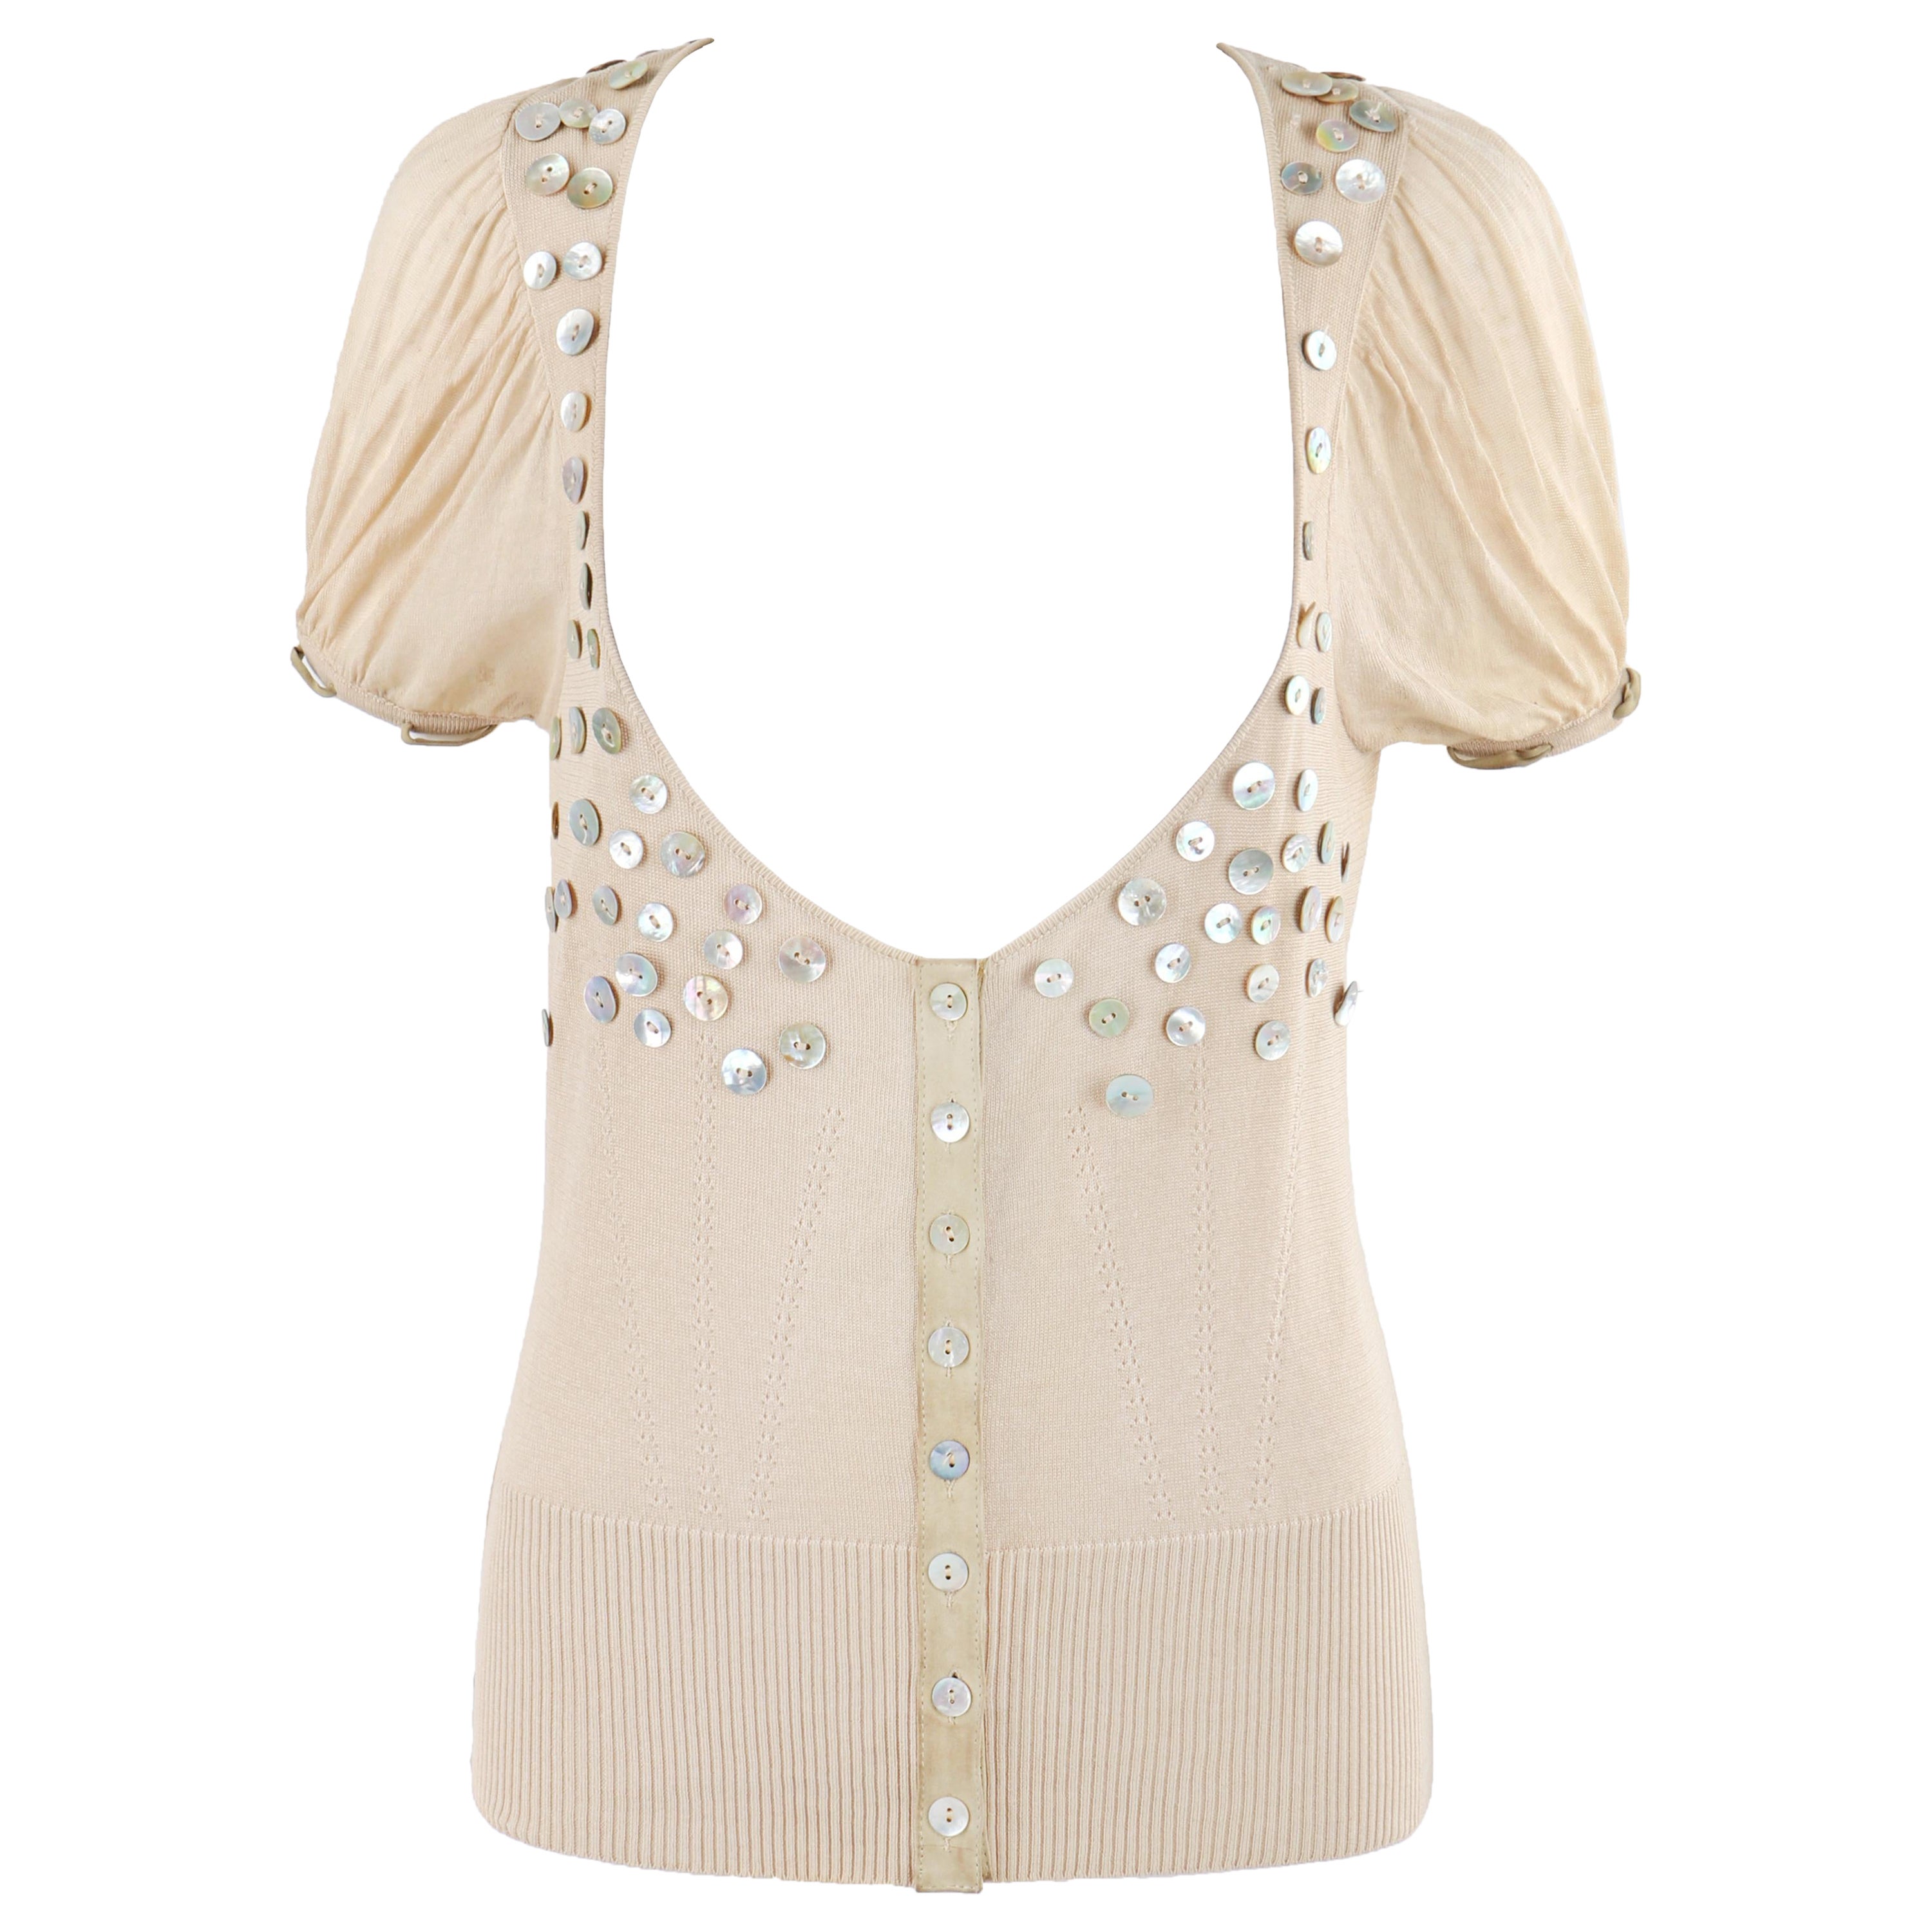 ALEXANDER McQUEEN S/S 2003 "Irere" Tan Knit Button Embellished Plunge Blouse Top For Sale